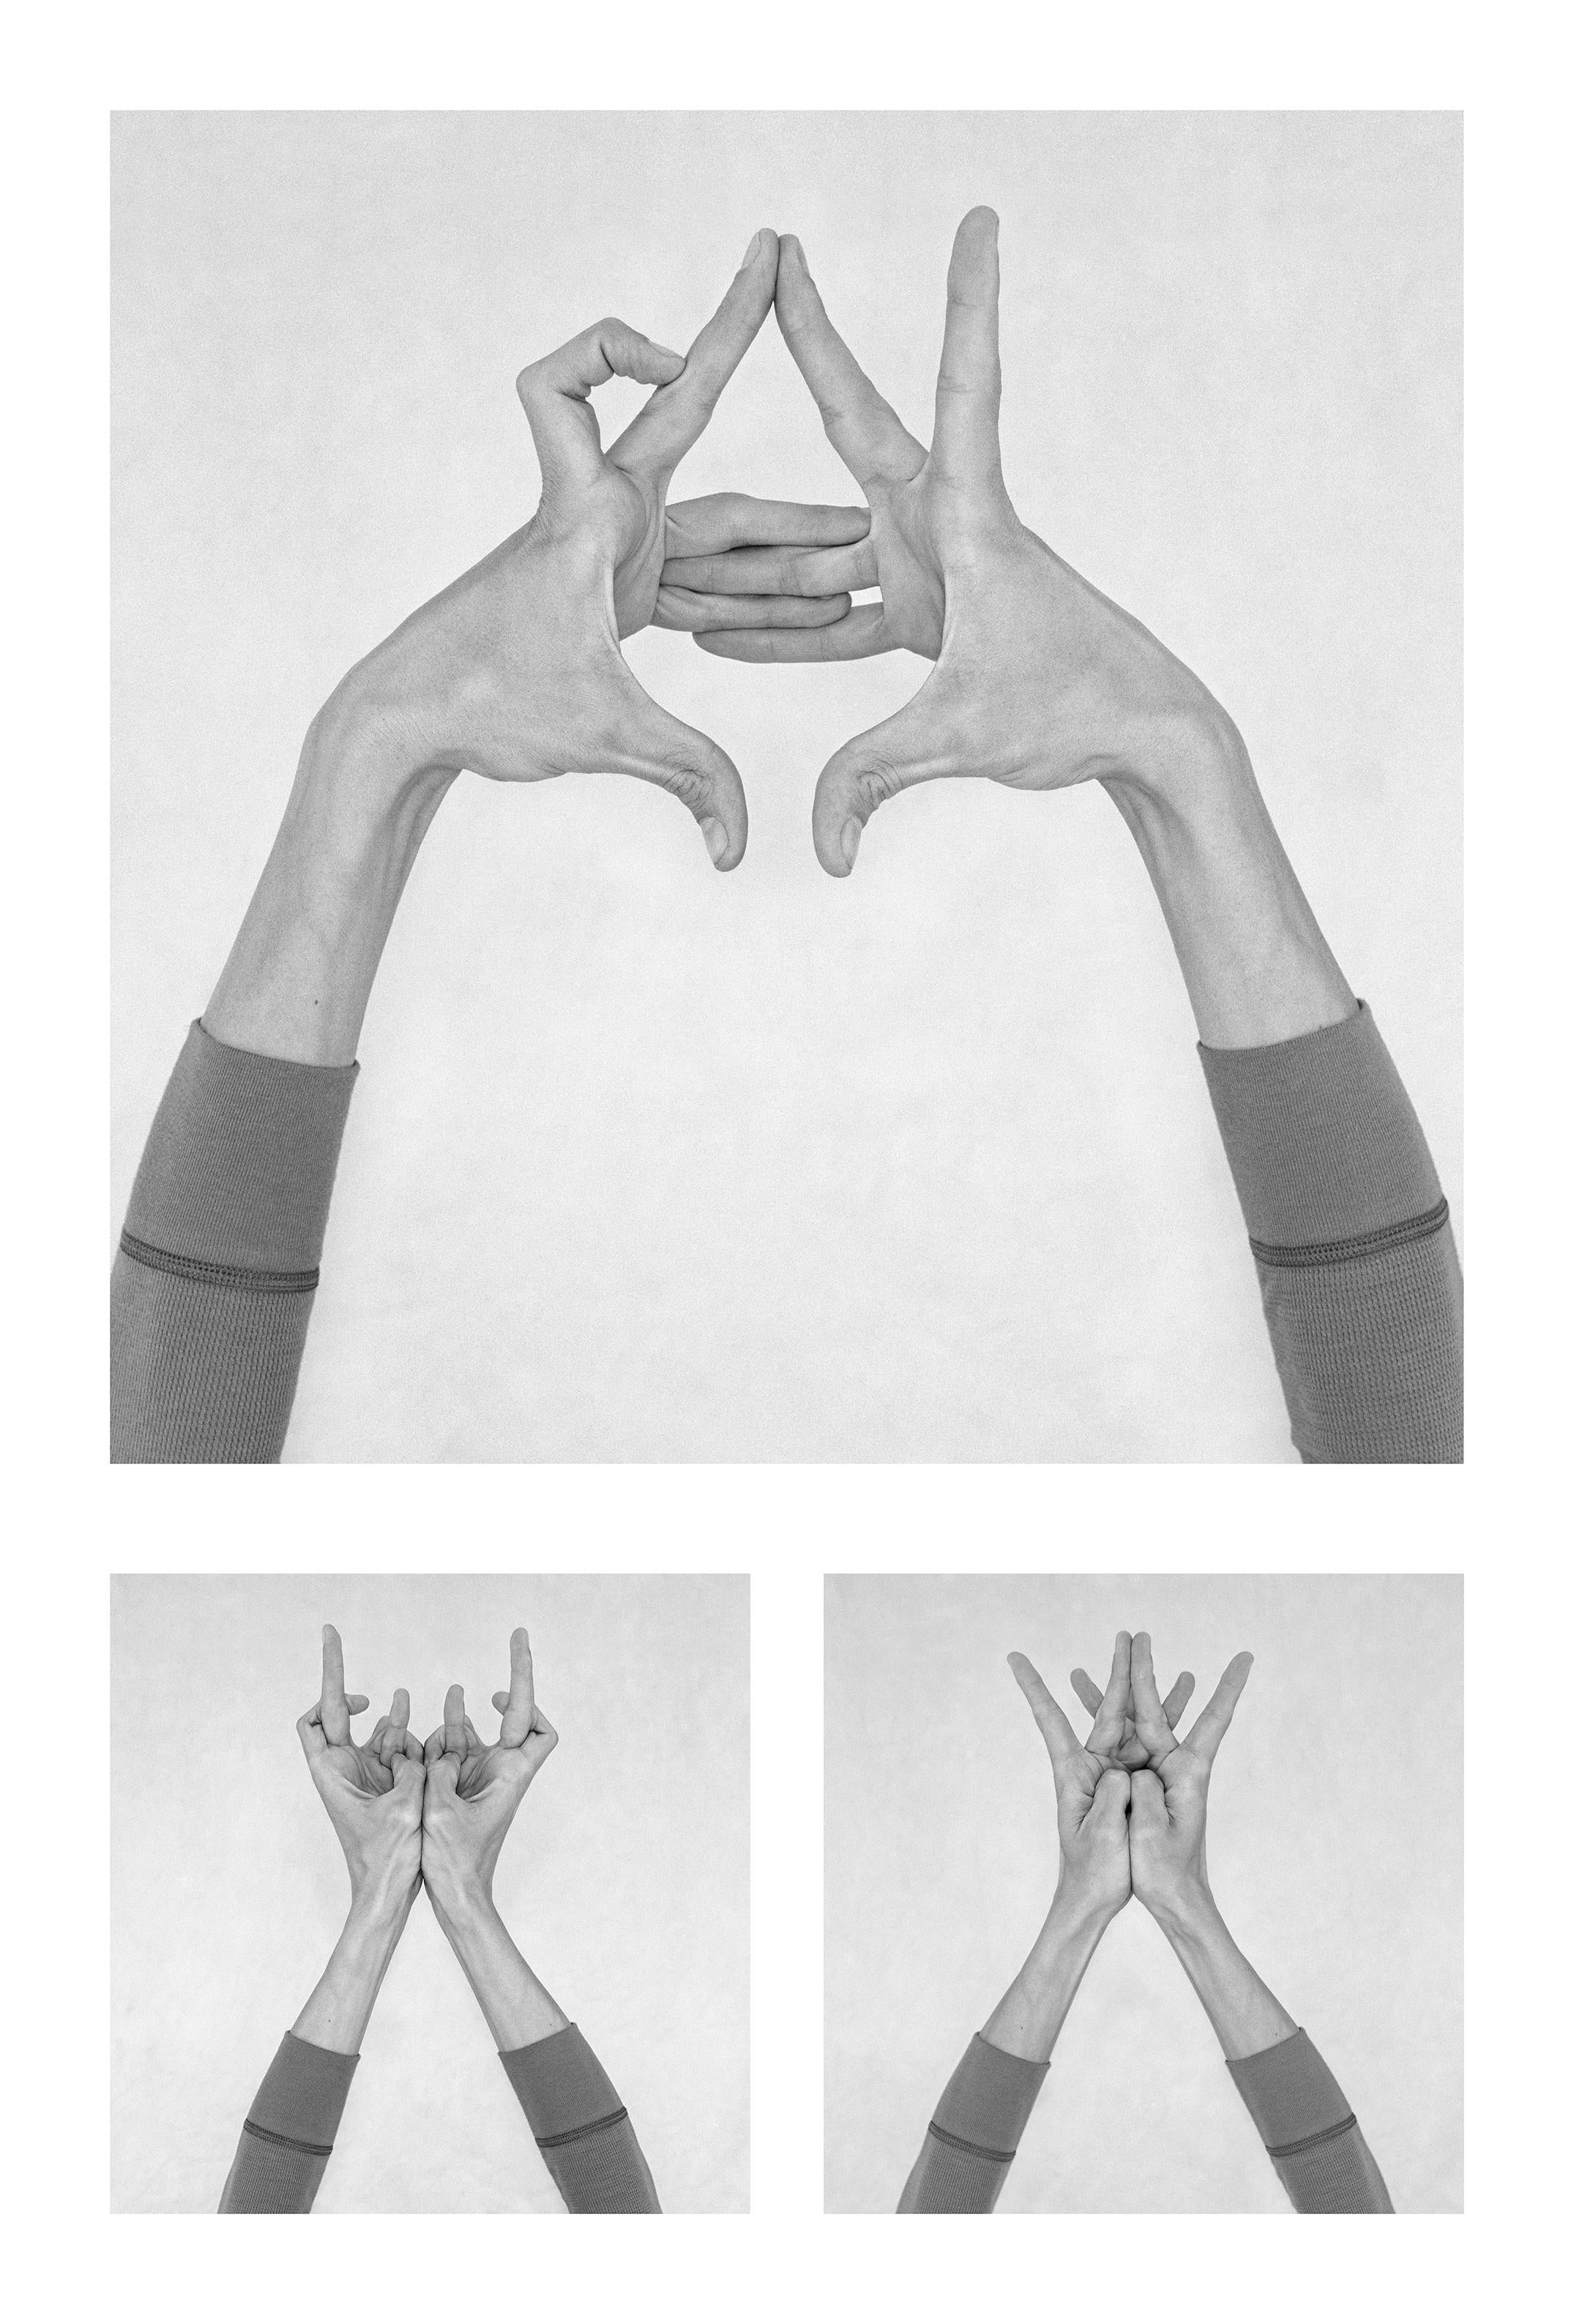 Nico Baixas / Gos-com-fuig Figurative Photograph - Untitled XII, XXXVII, and Untitled XXVI. Hands. From the Series Chiromorphose